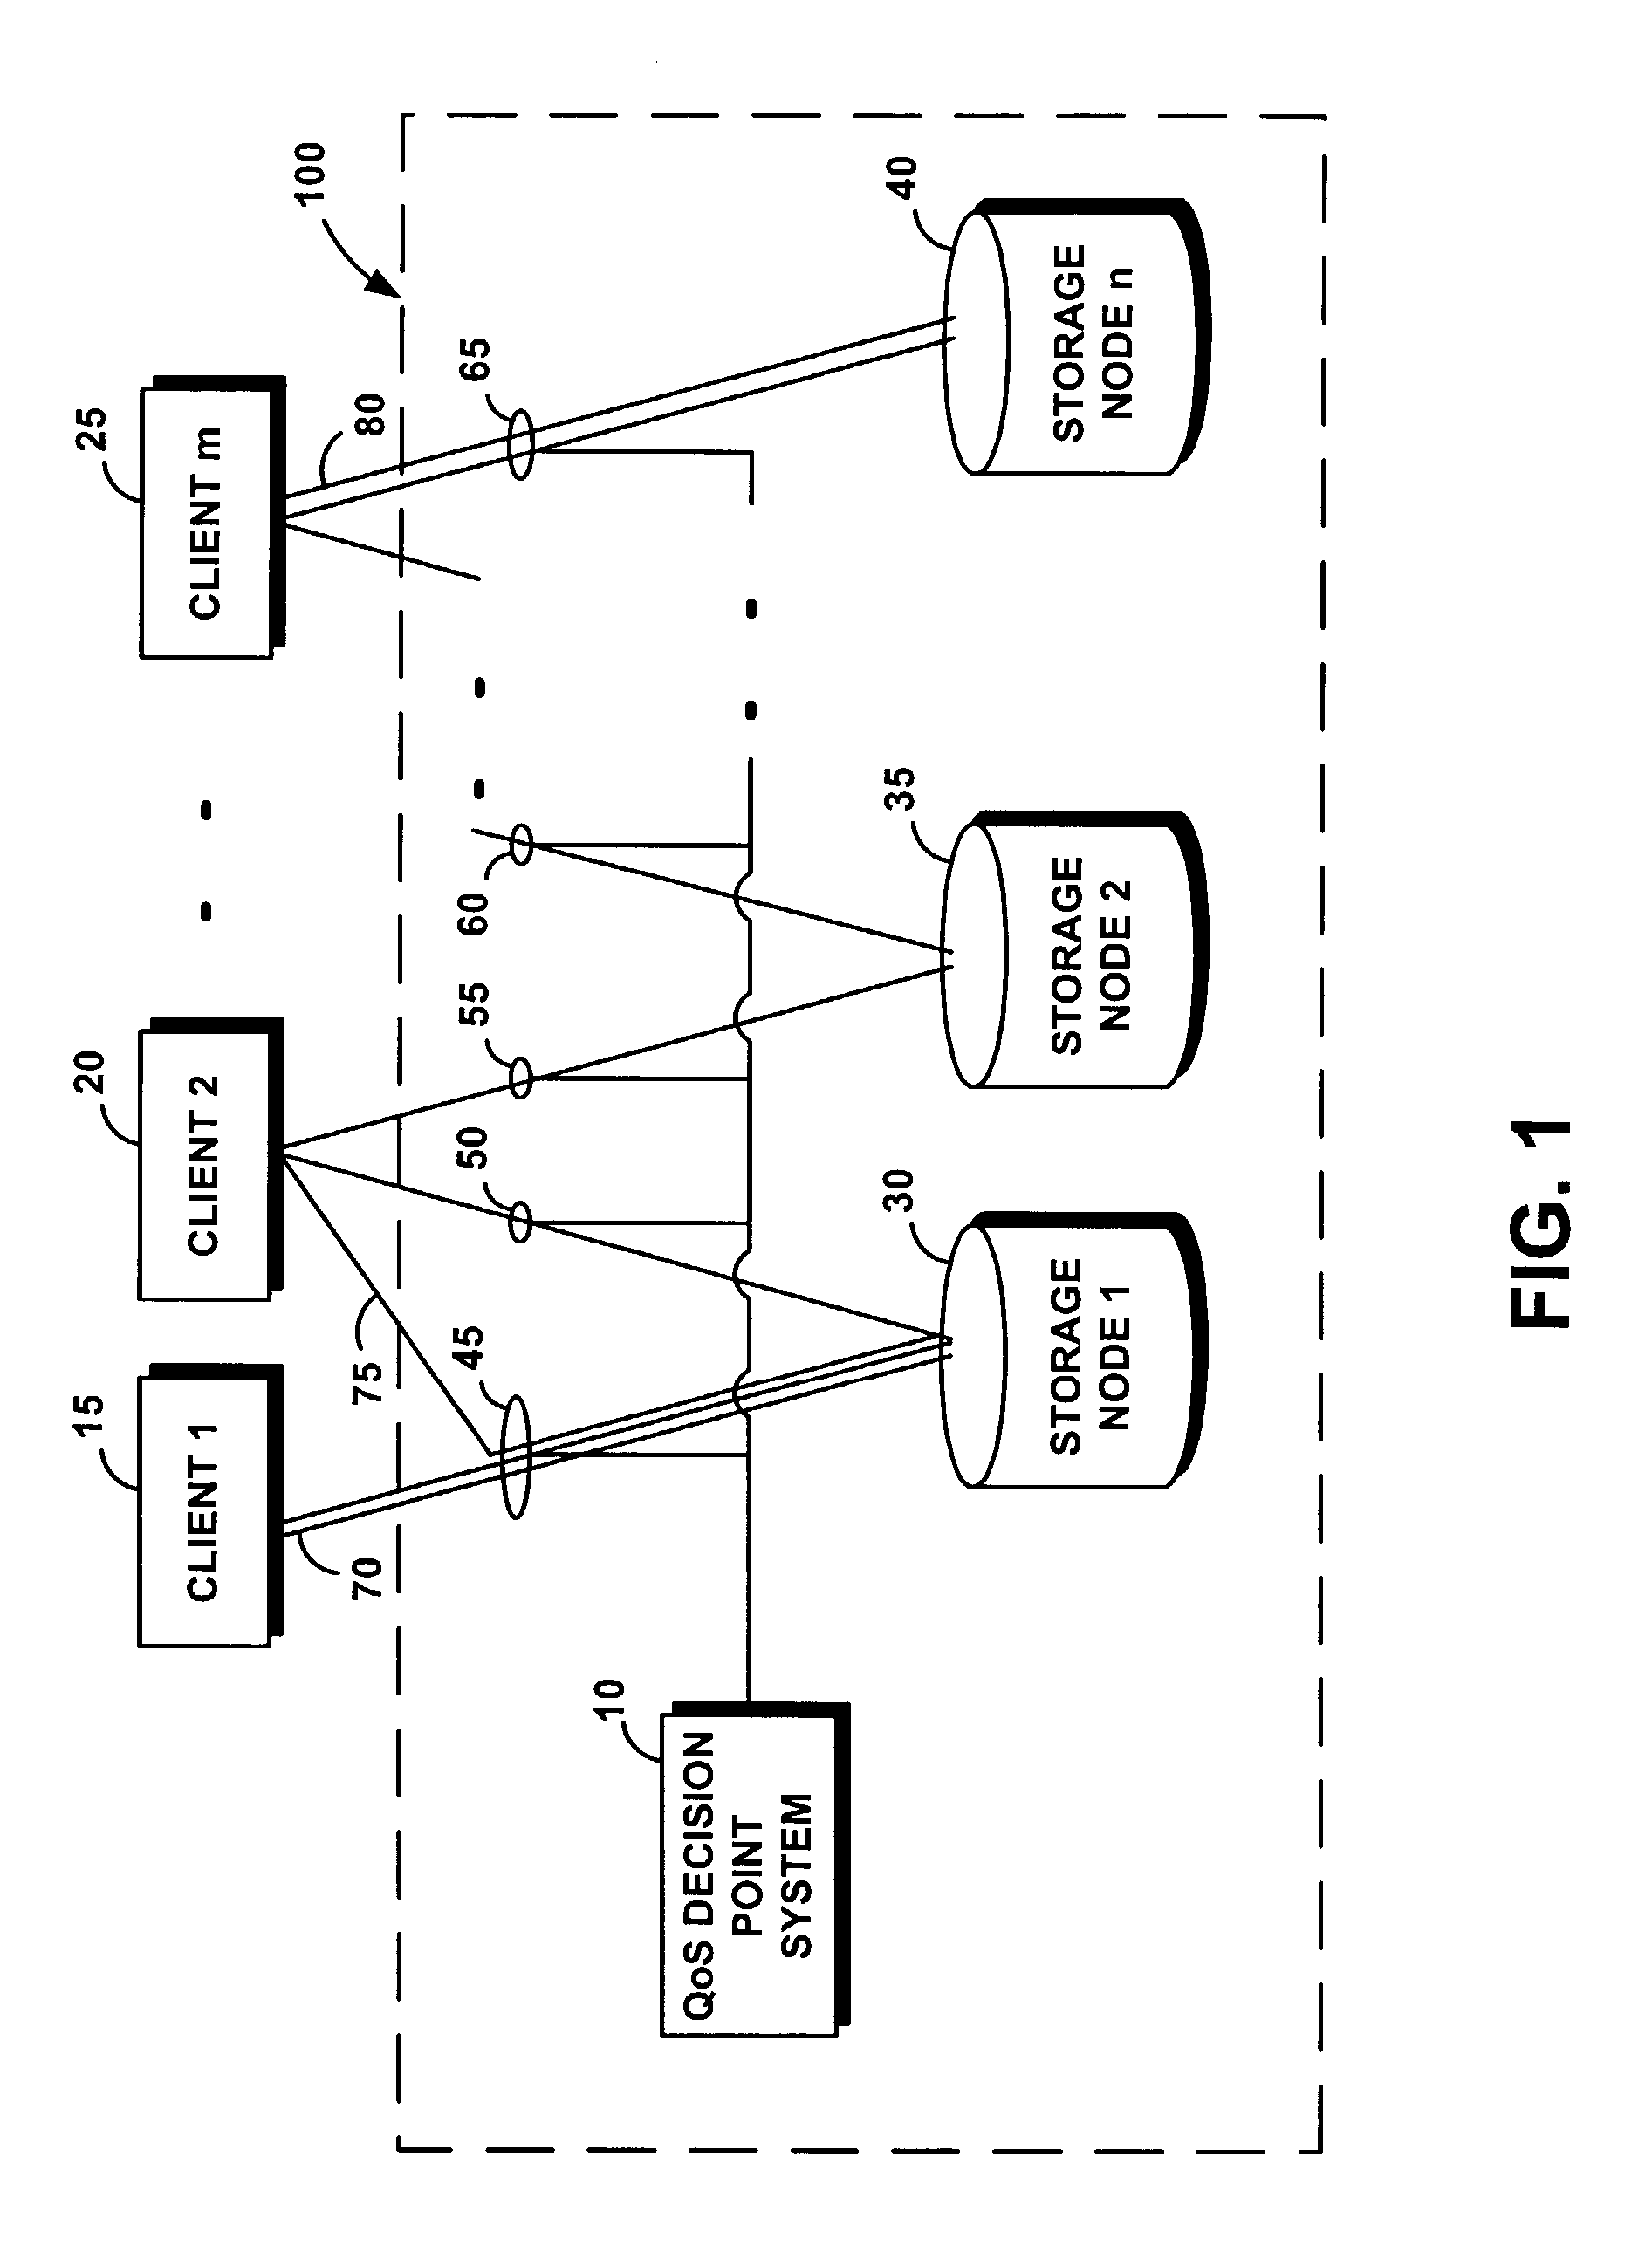 System and method for utilizing informed throttling to guarantee quality of service to I/O streams